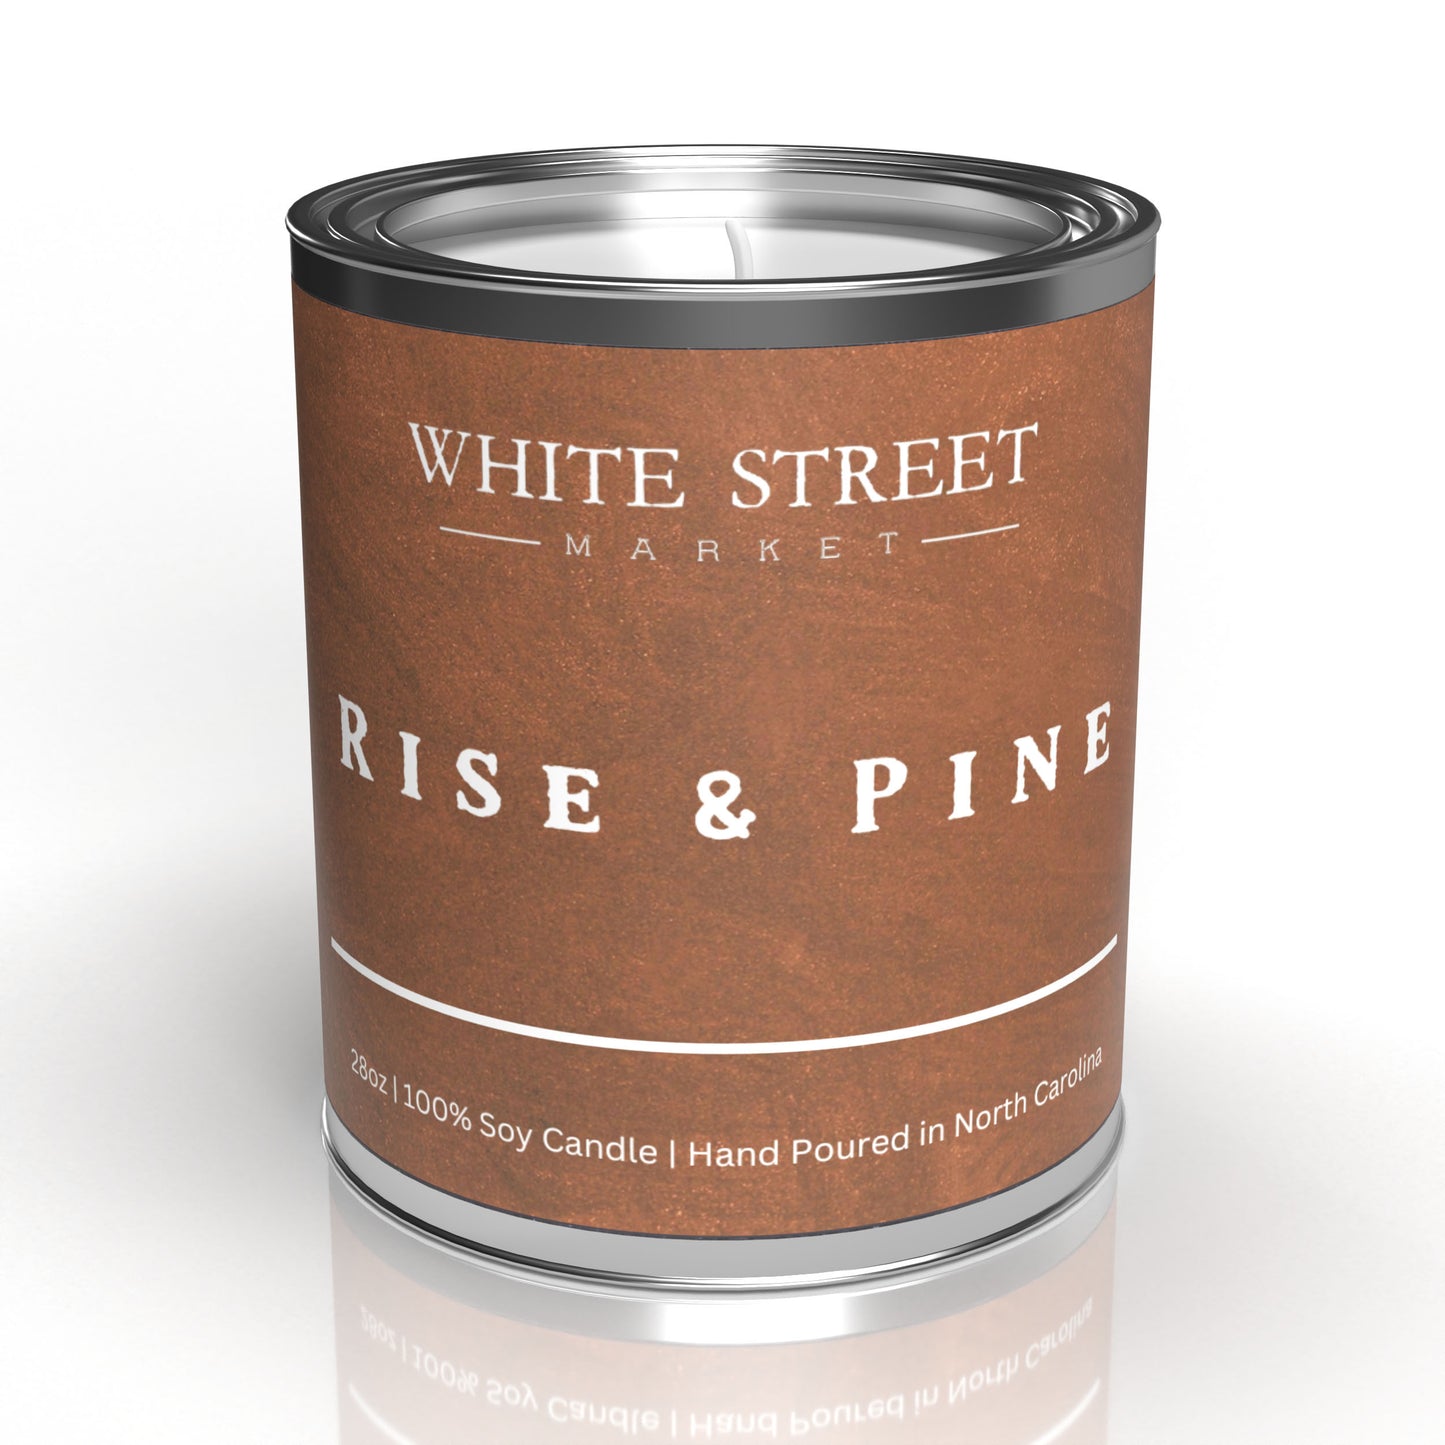 Rise & Pine Candle - White Street Market